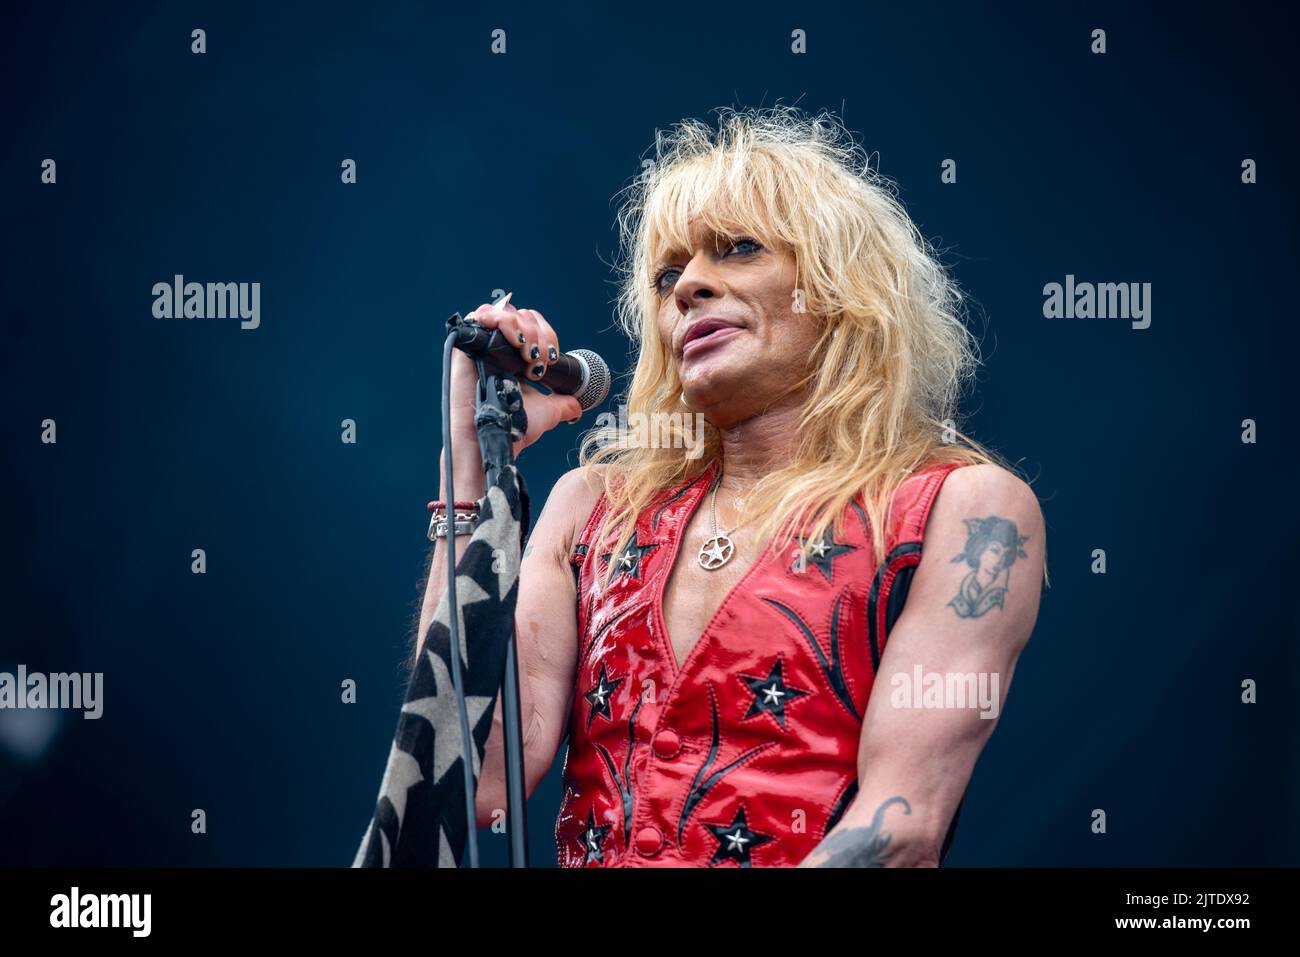 June 25, 2022: Michael Monroe performs at the Hellfest Open Air festival Stock Photo